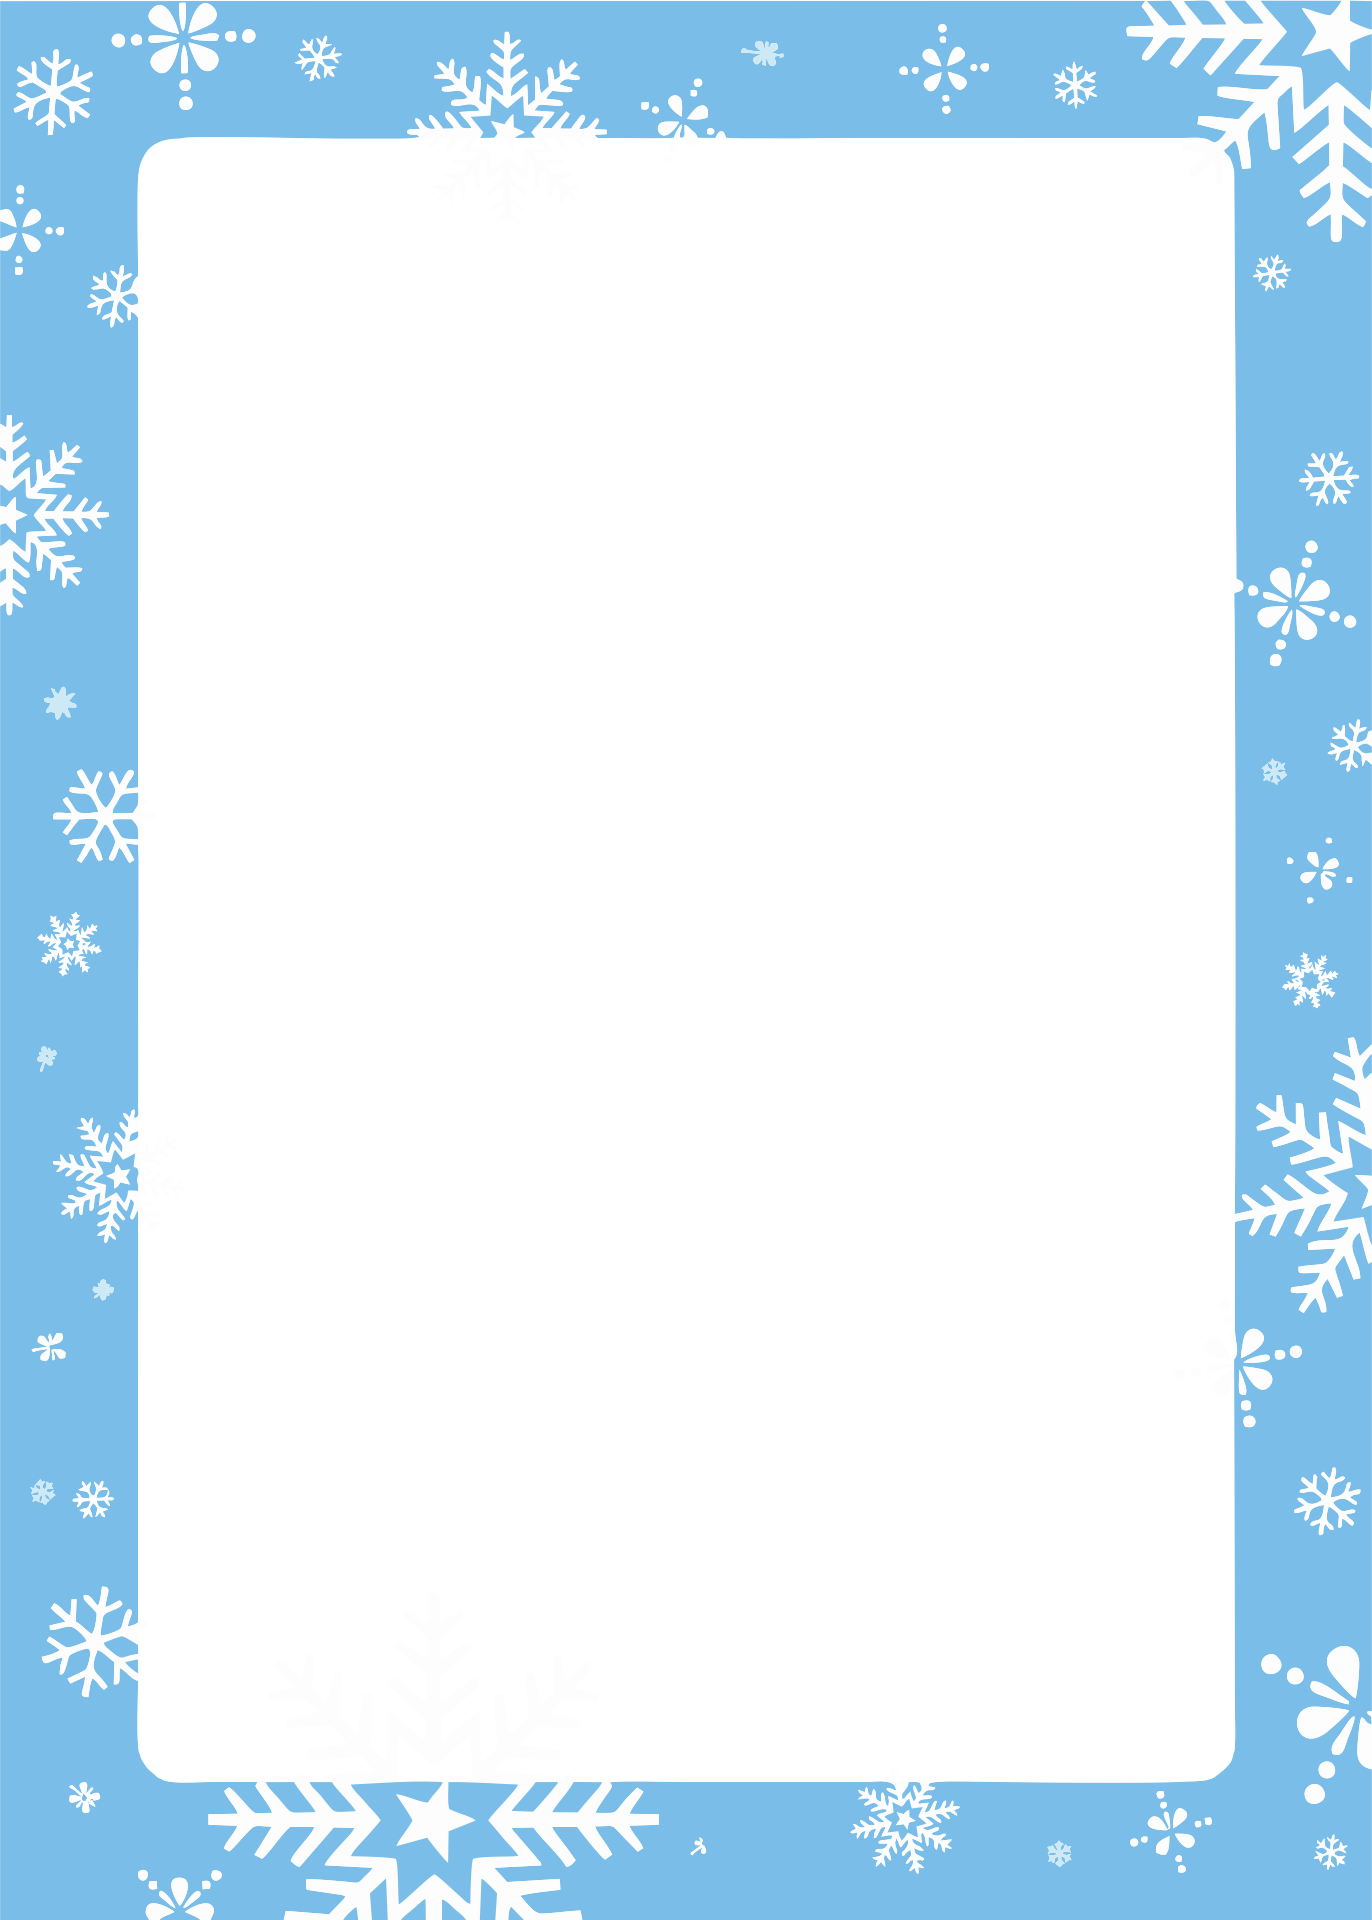 7-best-images-of-free-winter-printable-borders-free-printable-winter-borders-winter-border